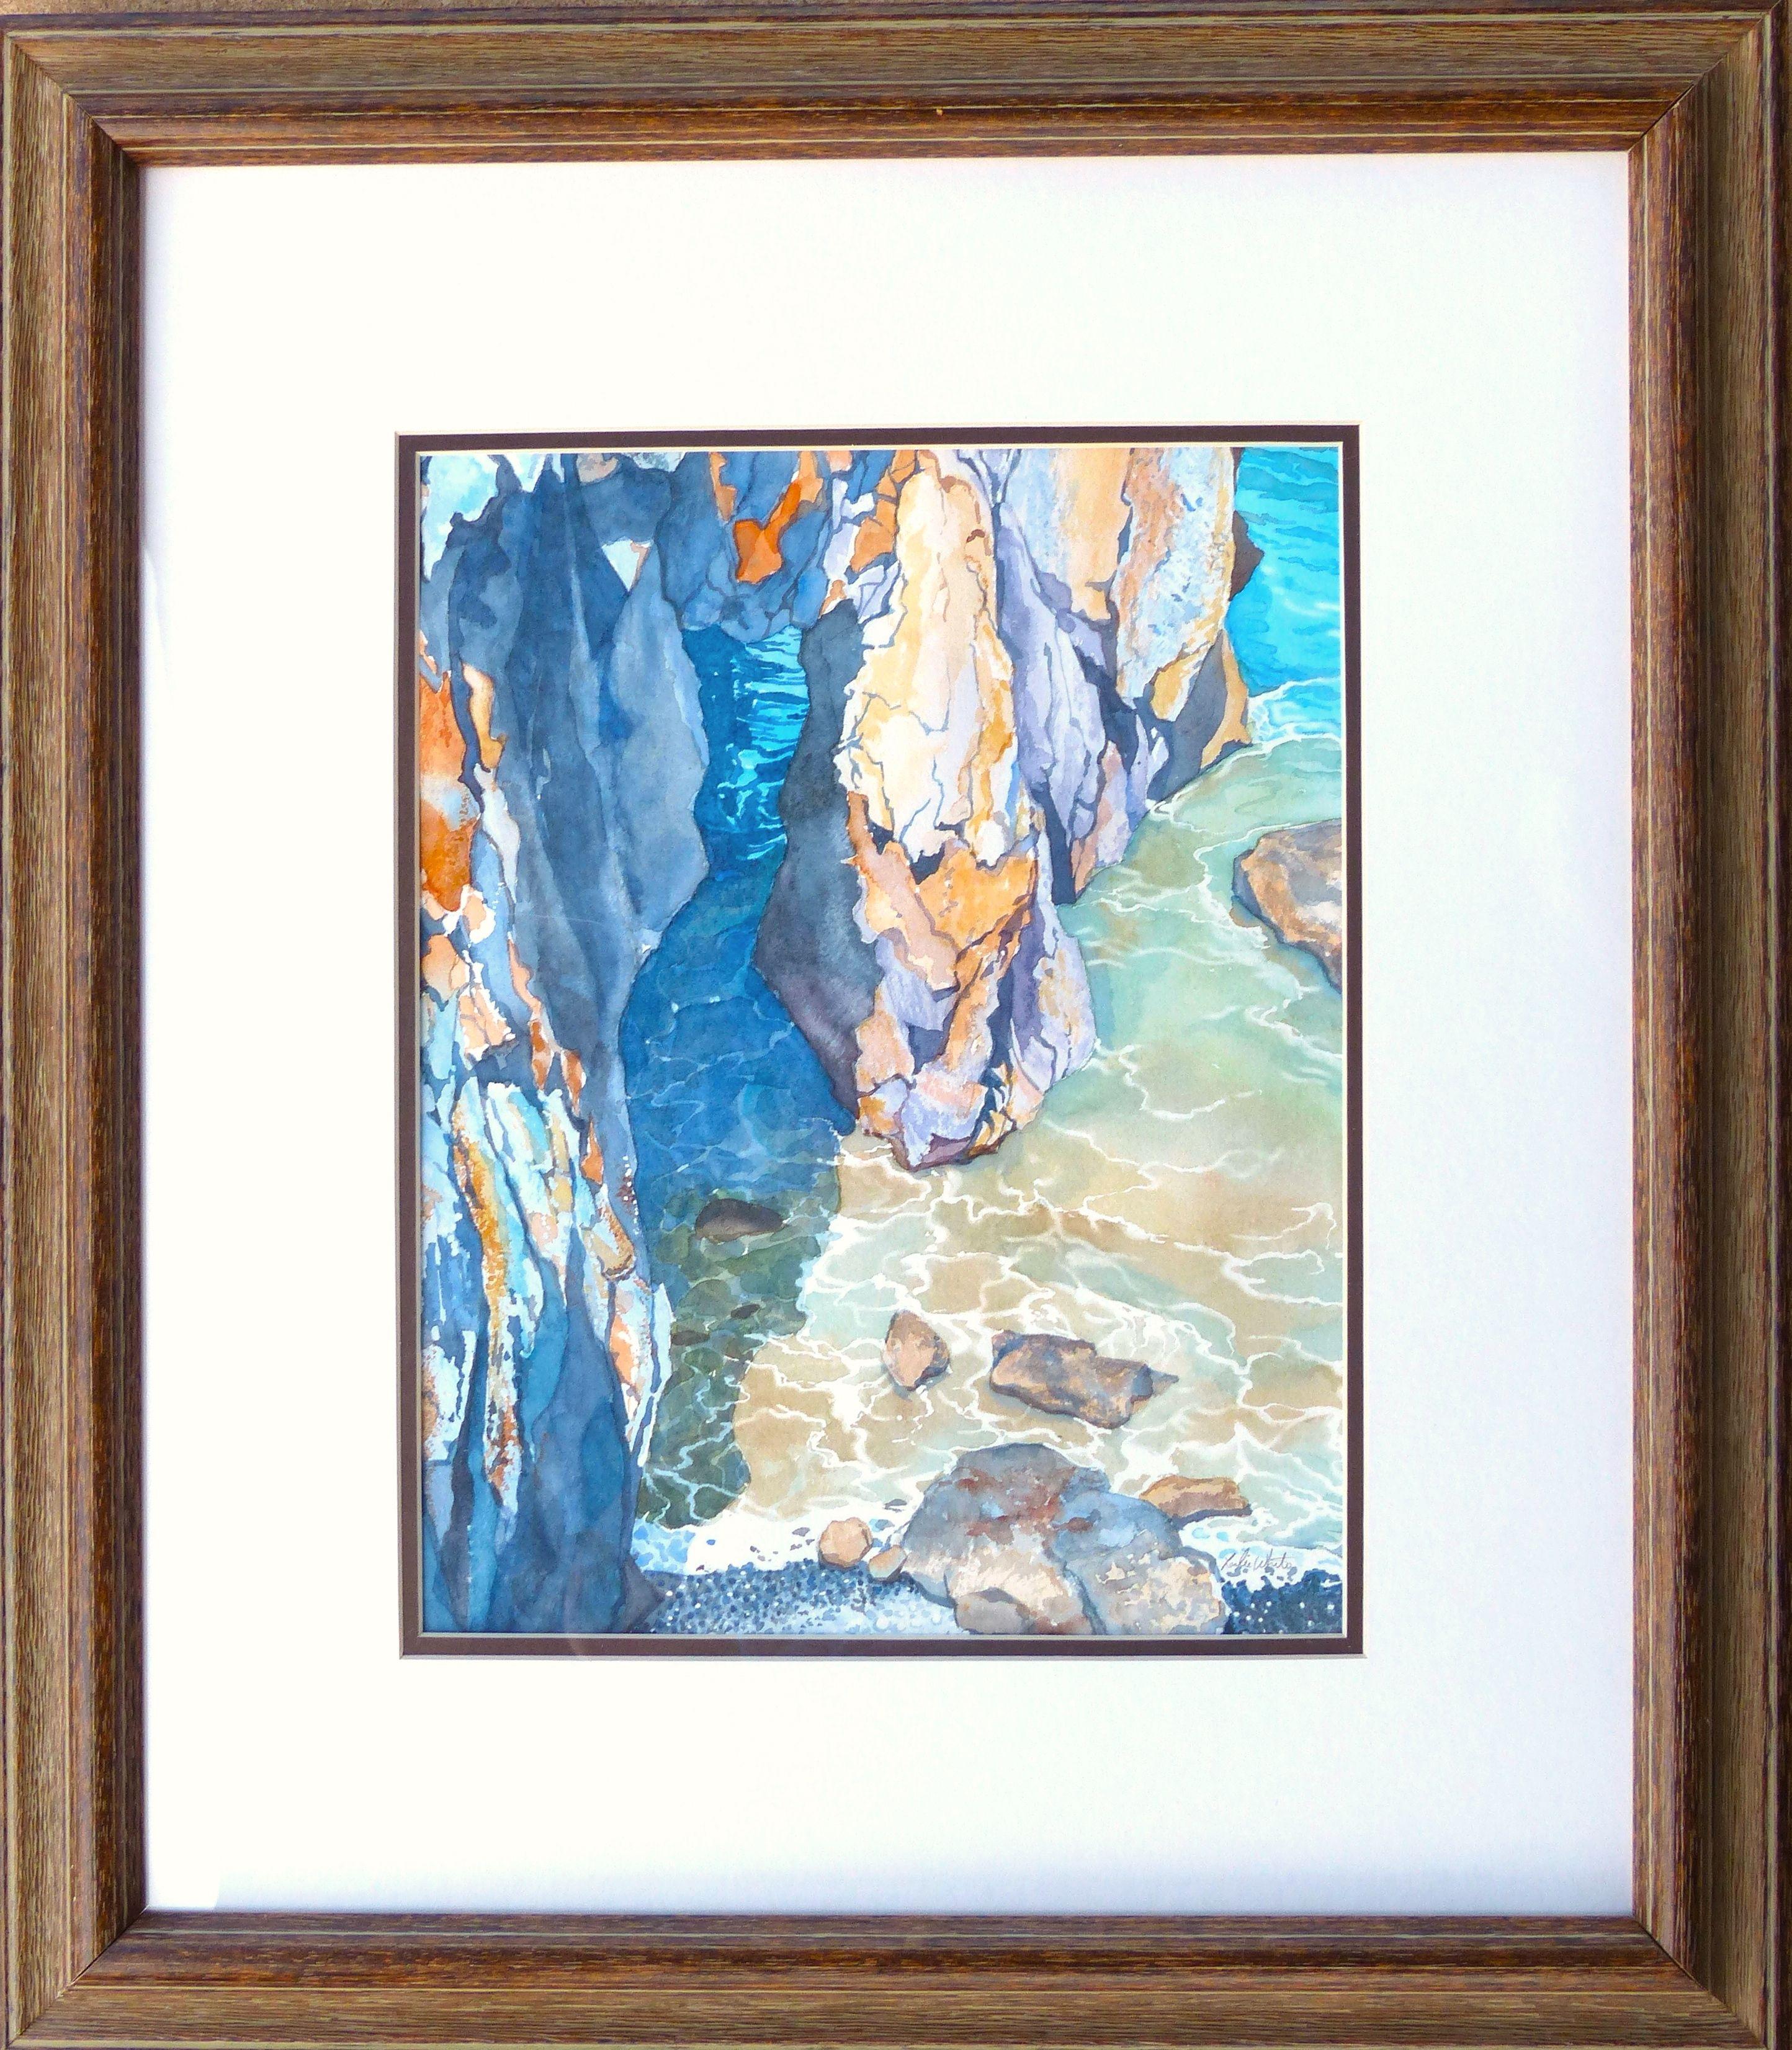 Wild Cove, Painting, Watercolor on Watercolor Paper - Realist Art by Leslie White